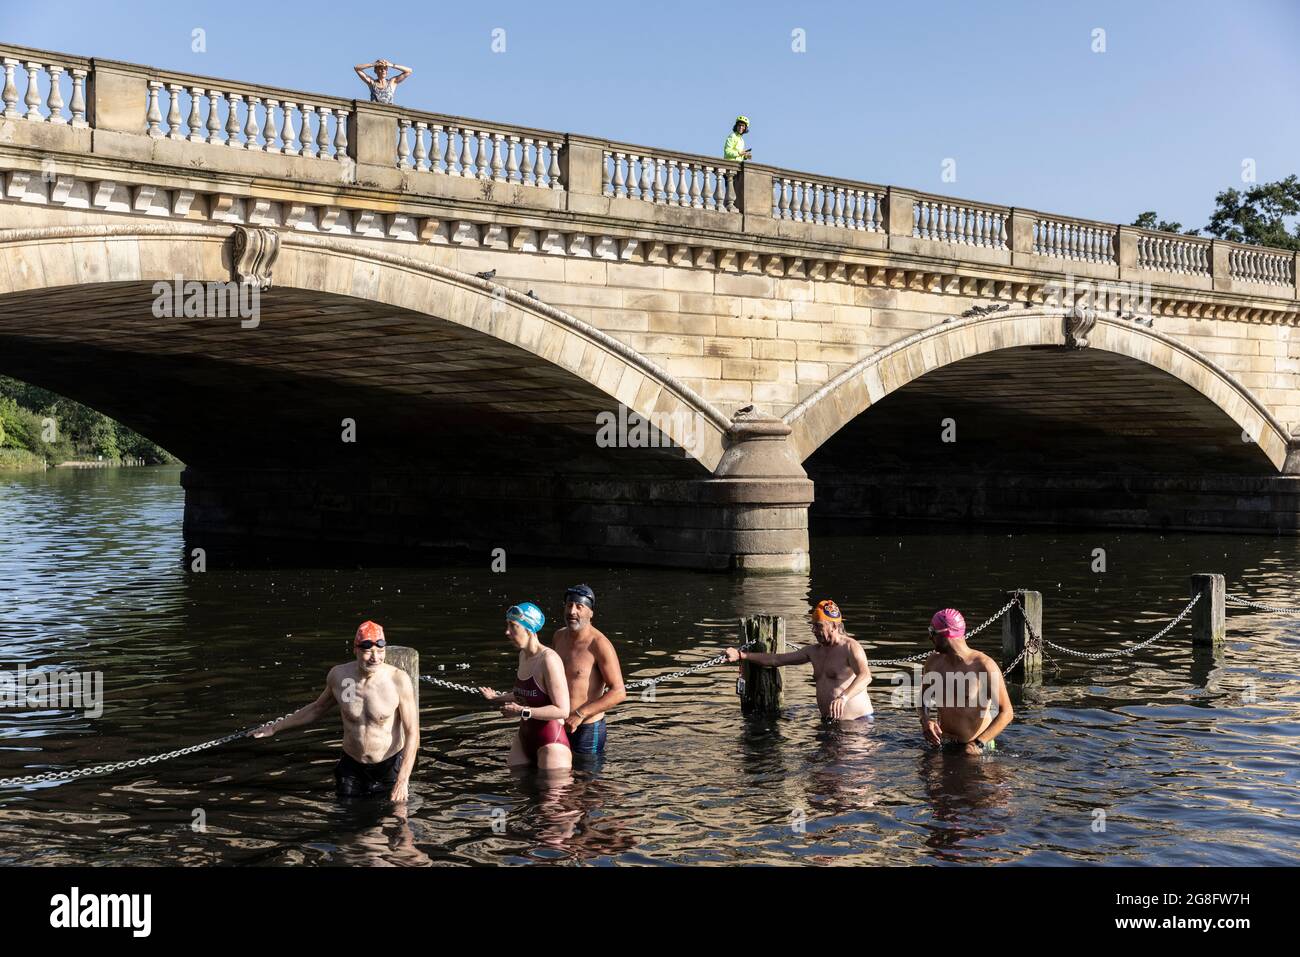 Serpentine Swimmers participate in the annual 'Bridge to Bridge' event. The race over approximately 1000 yards from Dell Bridget to Rennies Bridge. Stock Photo